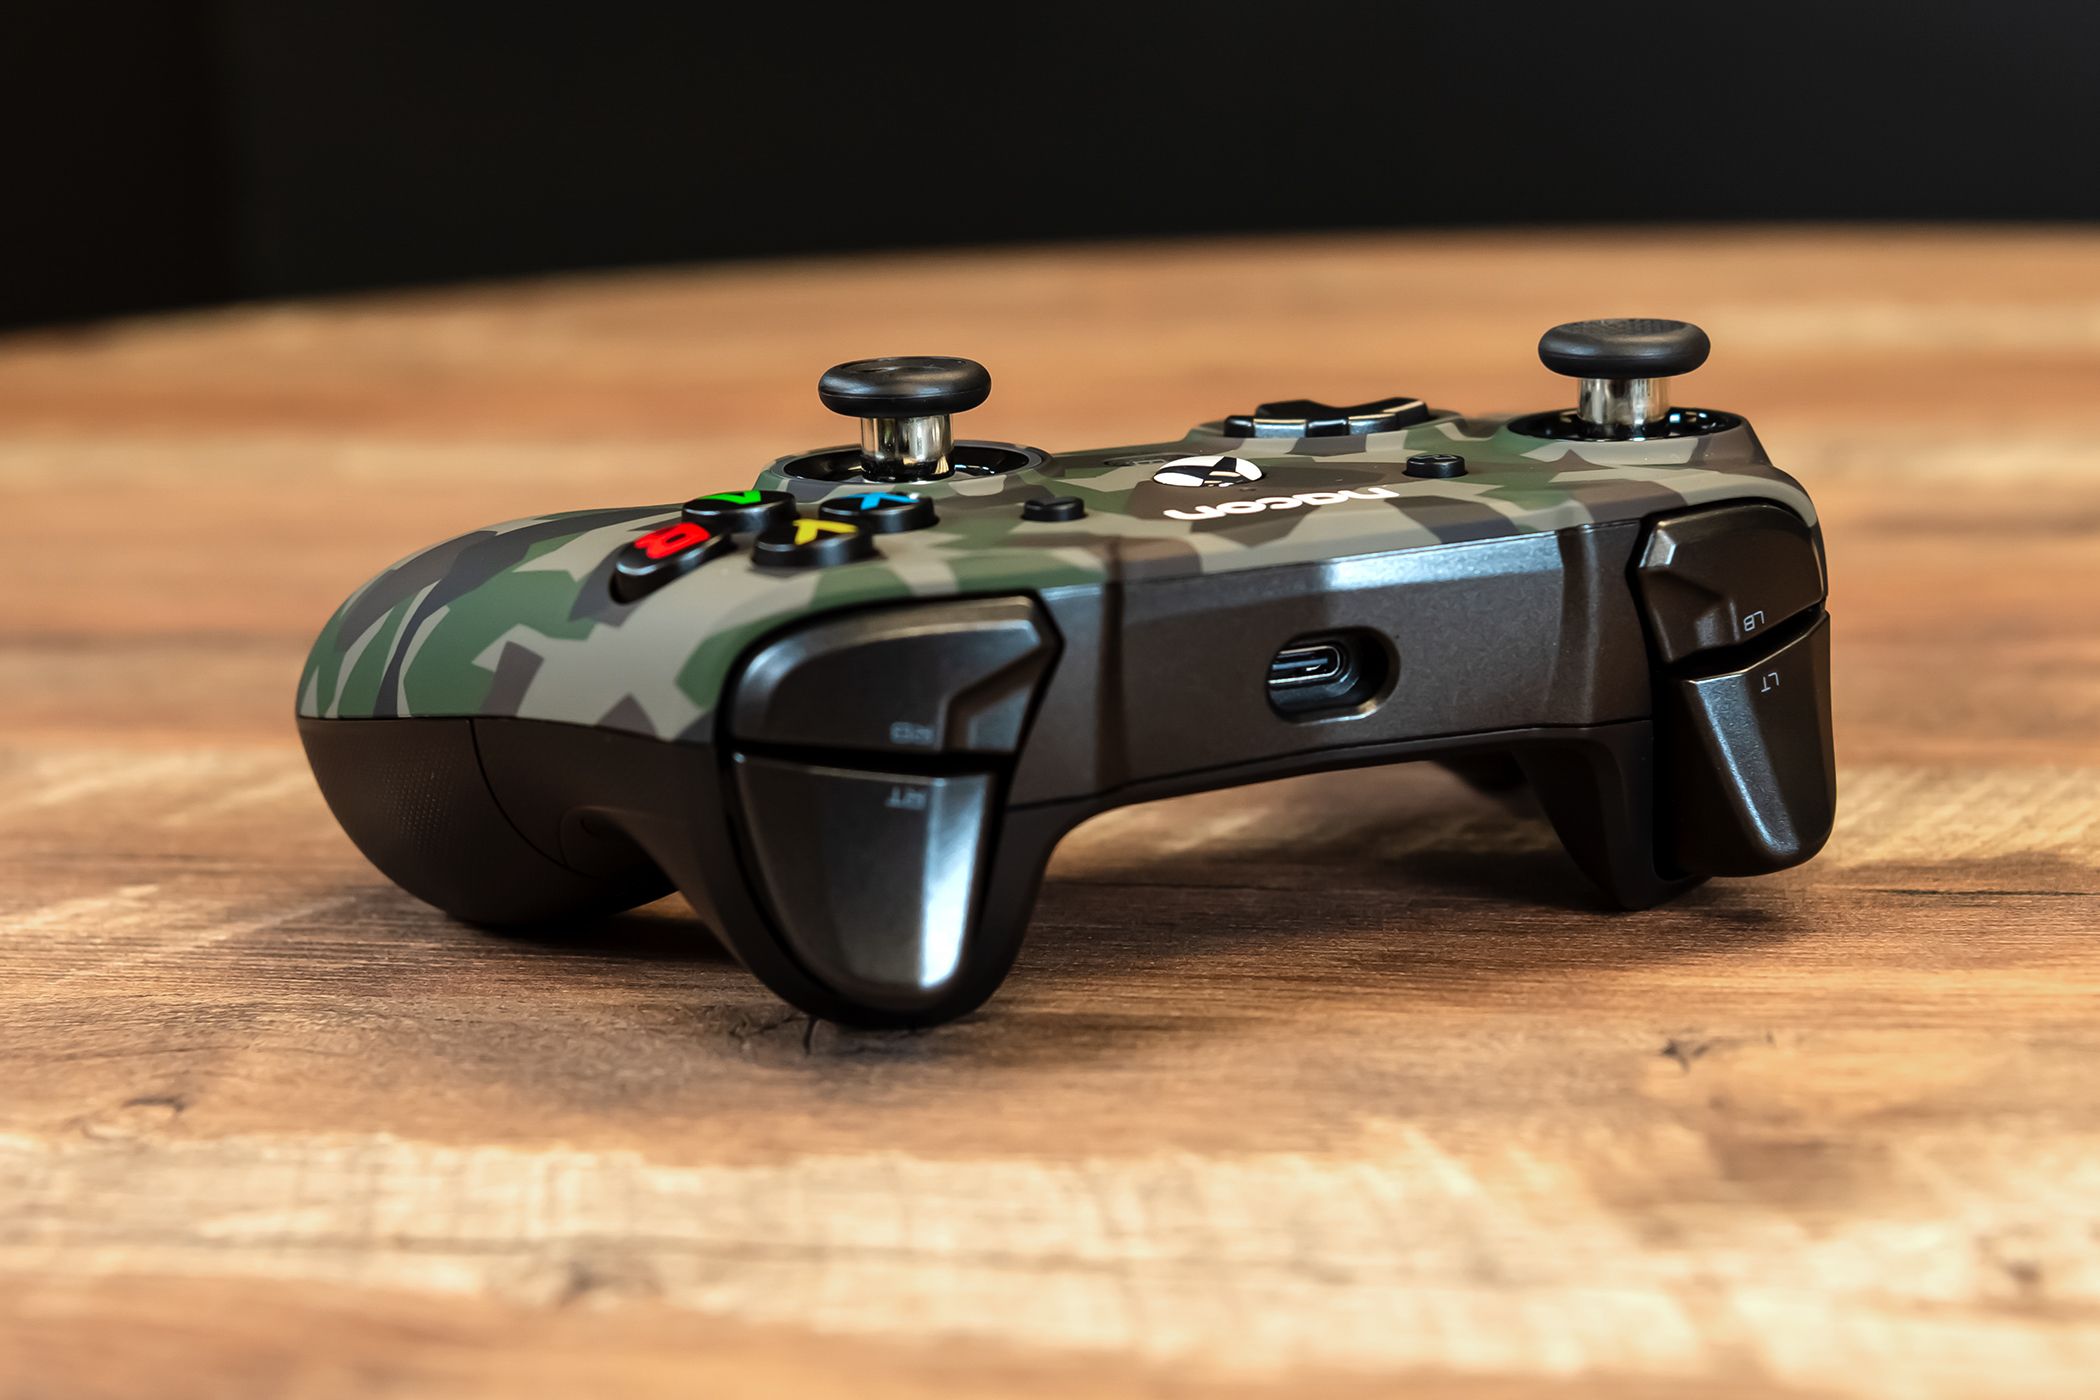 bumpers-and-triggers-on-the-nacon-revolution-x-controller-field-camo-1jpg_53334164369_o